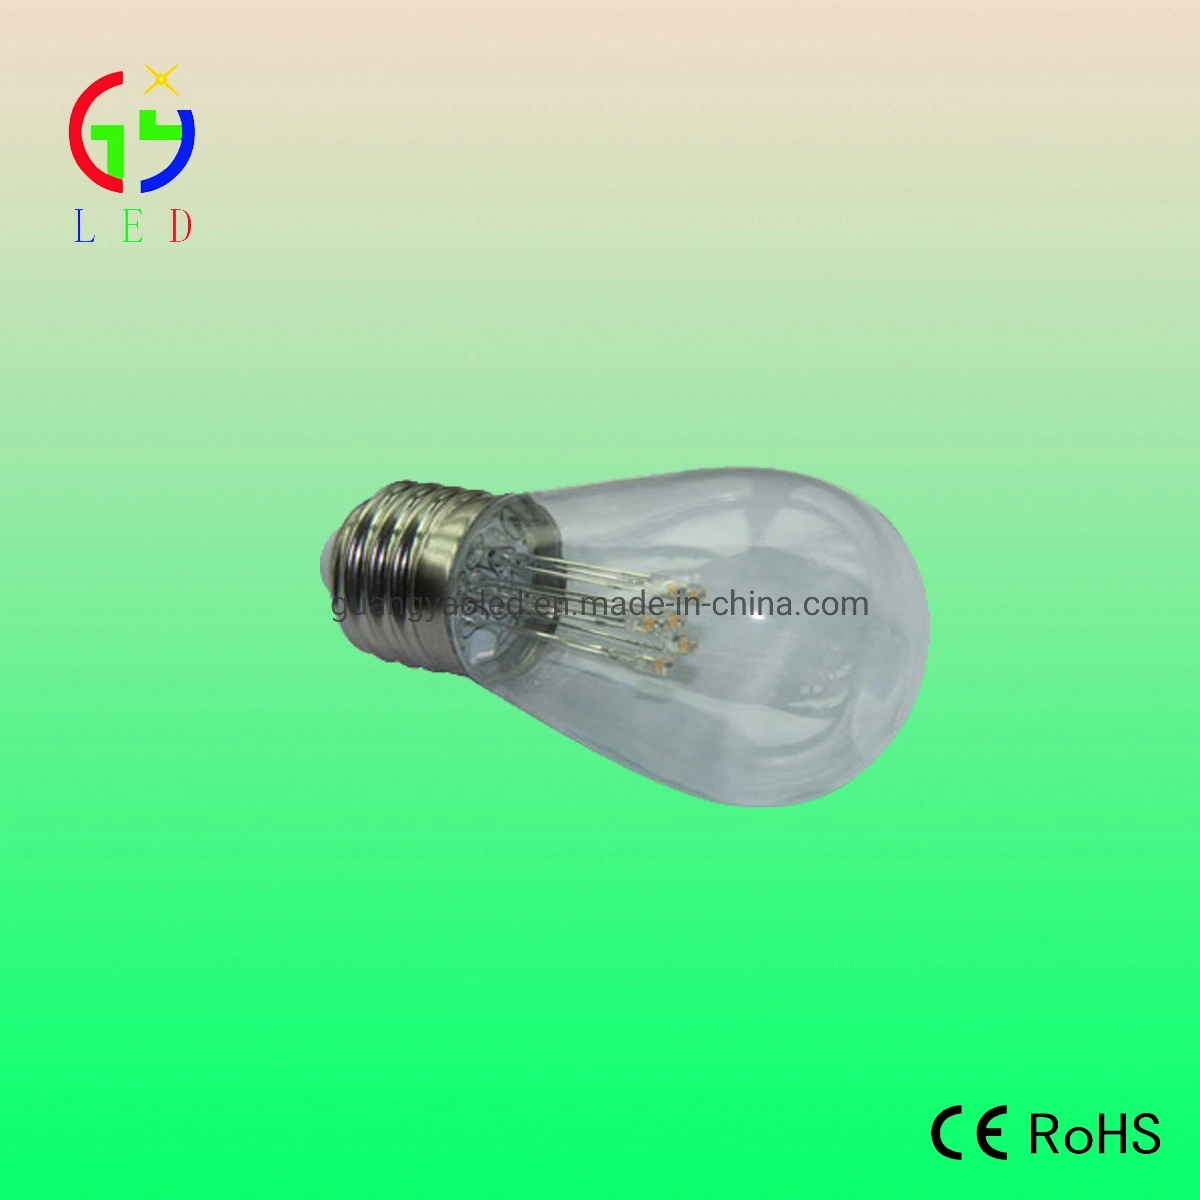 Good Price of LED S14 Clear Bulb, LED St45 E27 Sign String Lamp, LED Clear S14 Yard Decorative Lighting